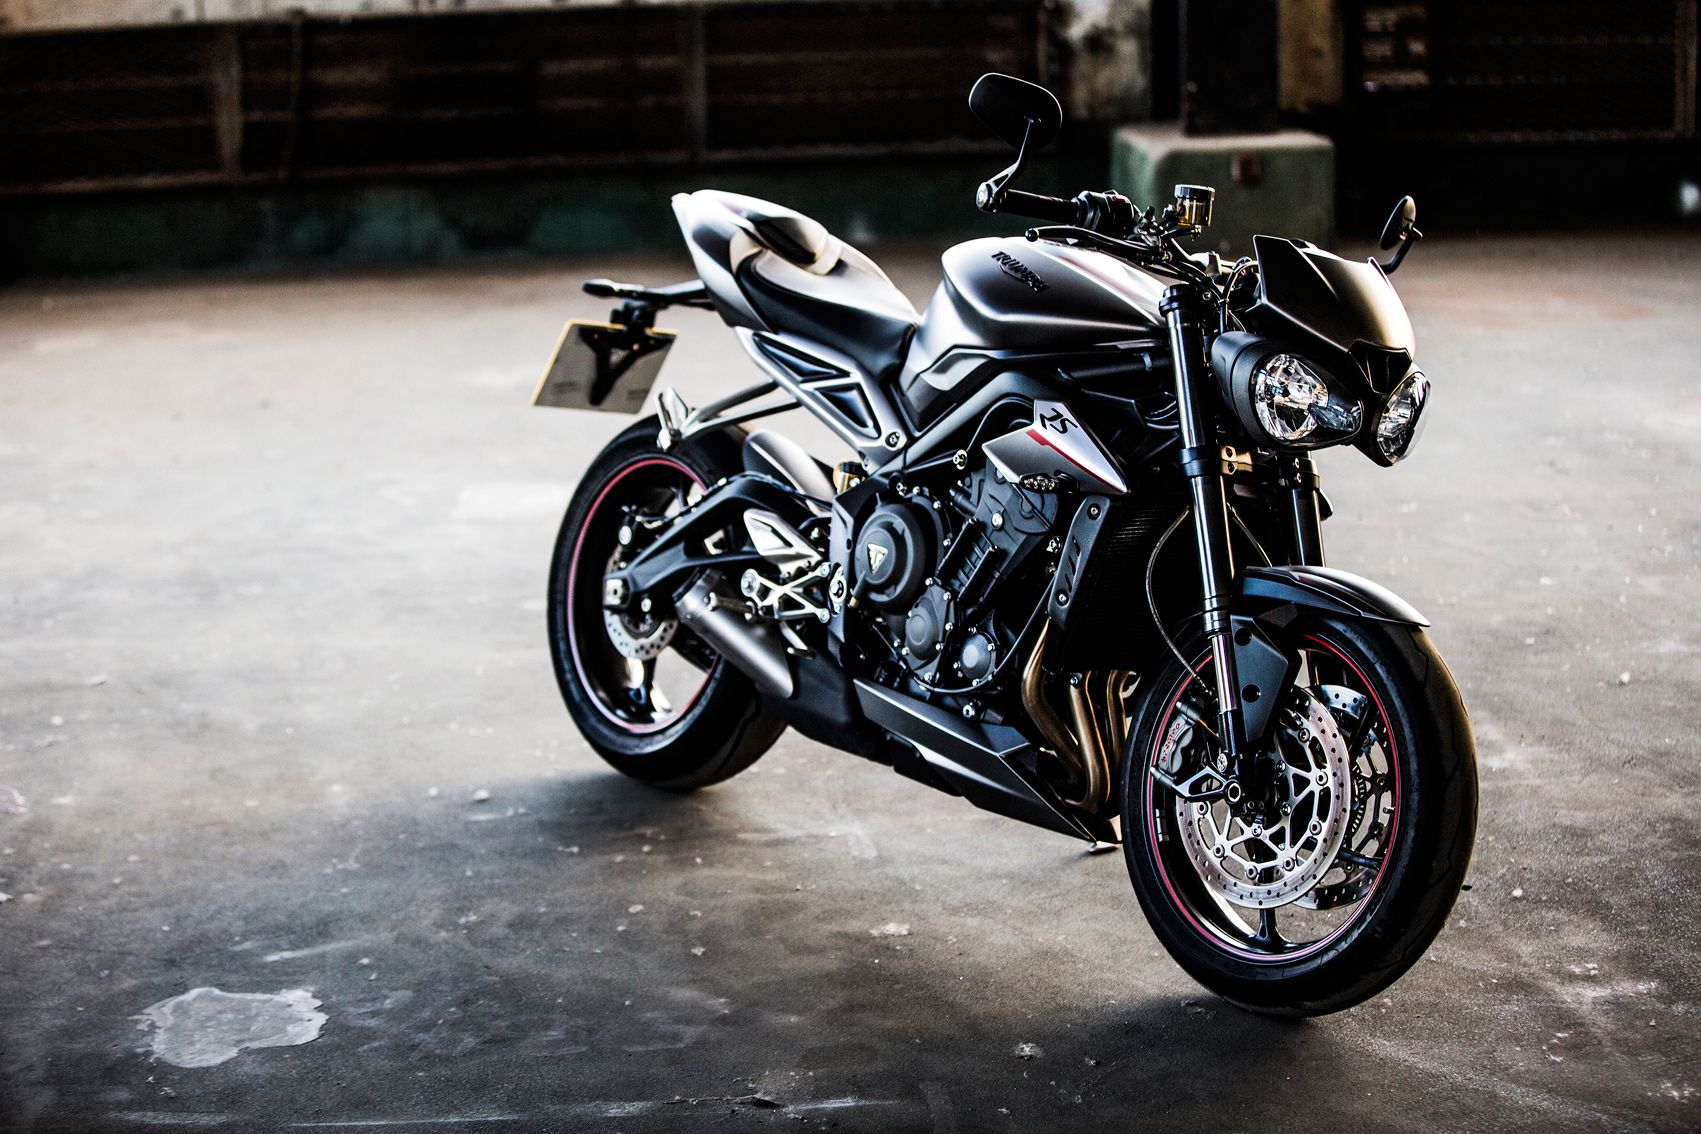 The Street Triple retains its aggressive looks